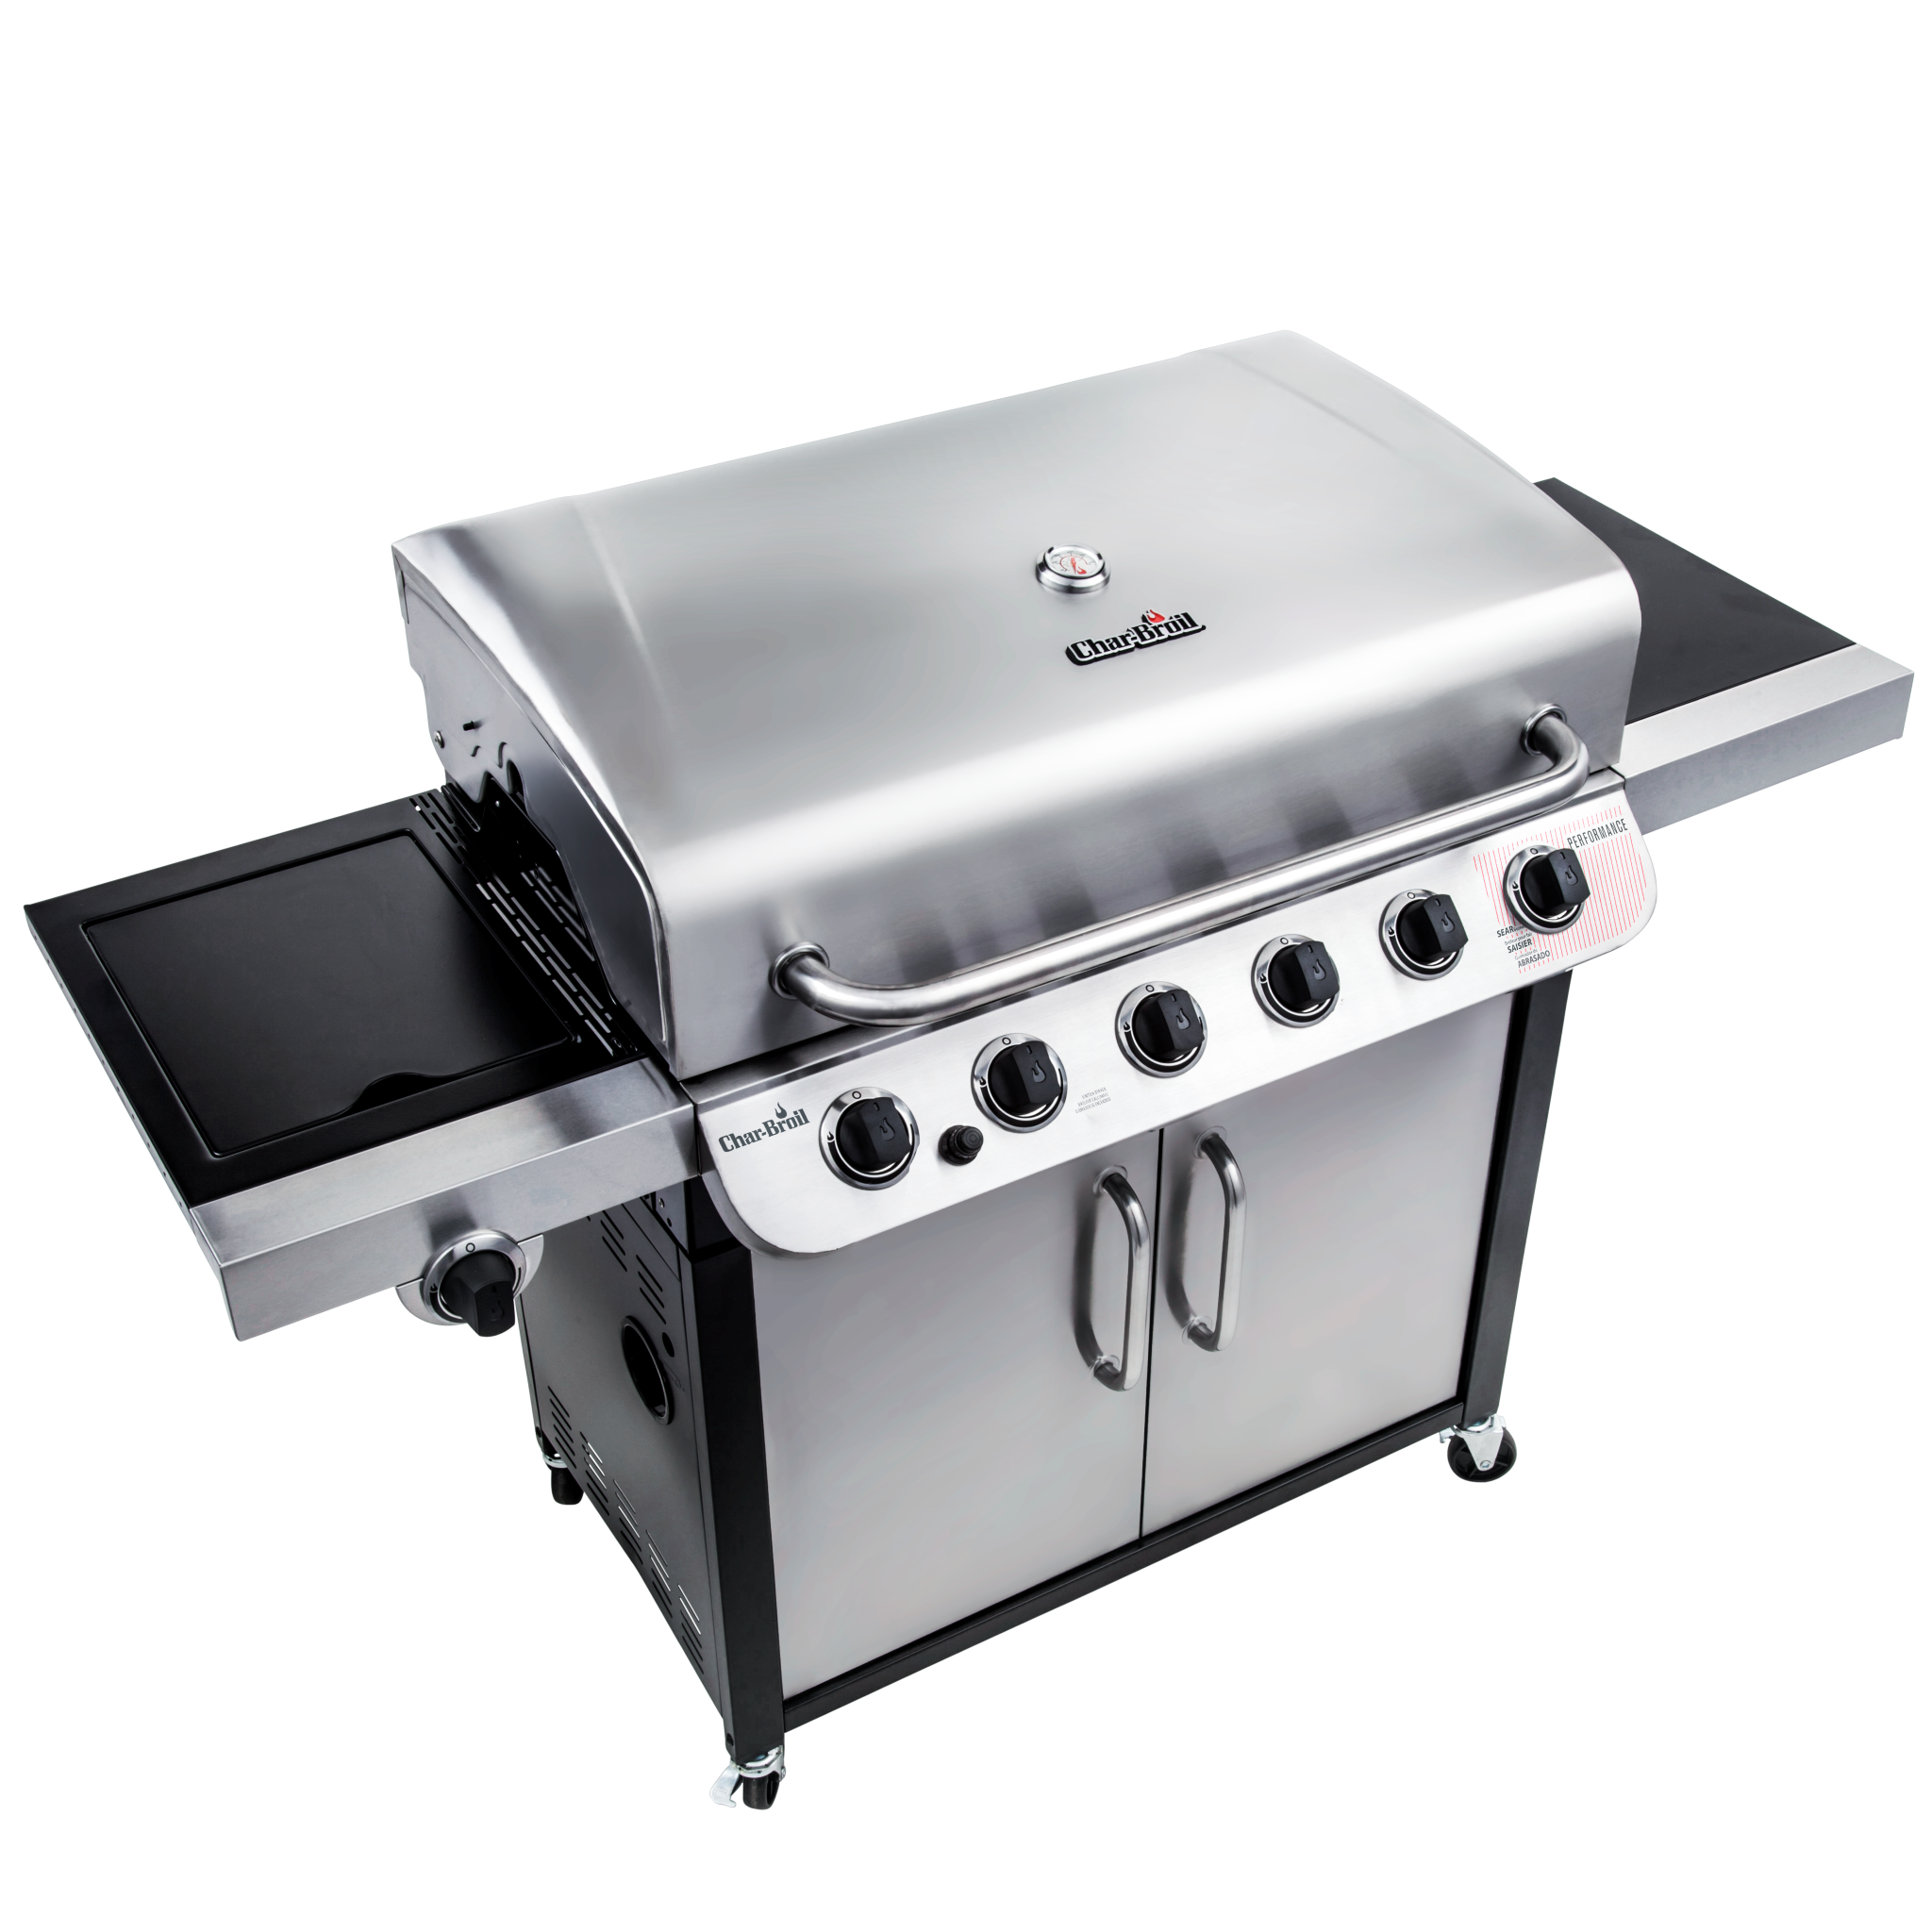 Char-Broil Performance Series 6-burner Liquid Propane Gas Grill with Side Burner, Black & Stainless - image 2 of 11